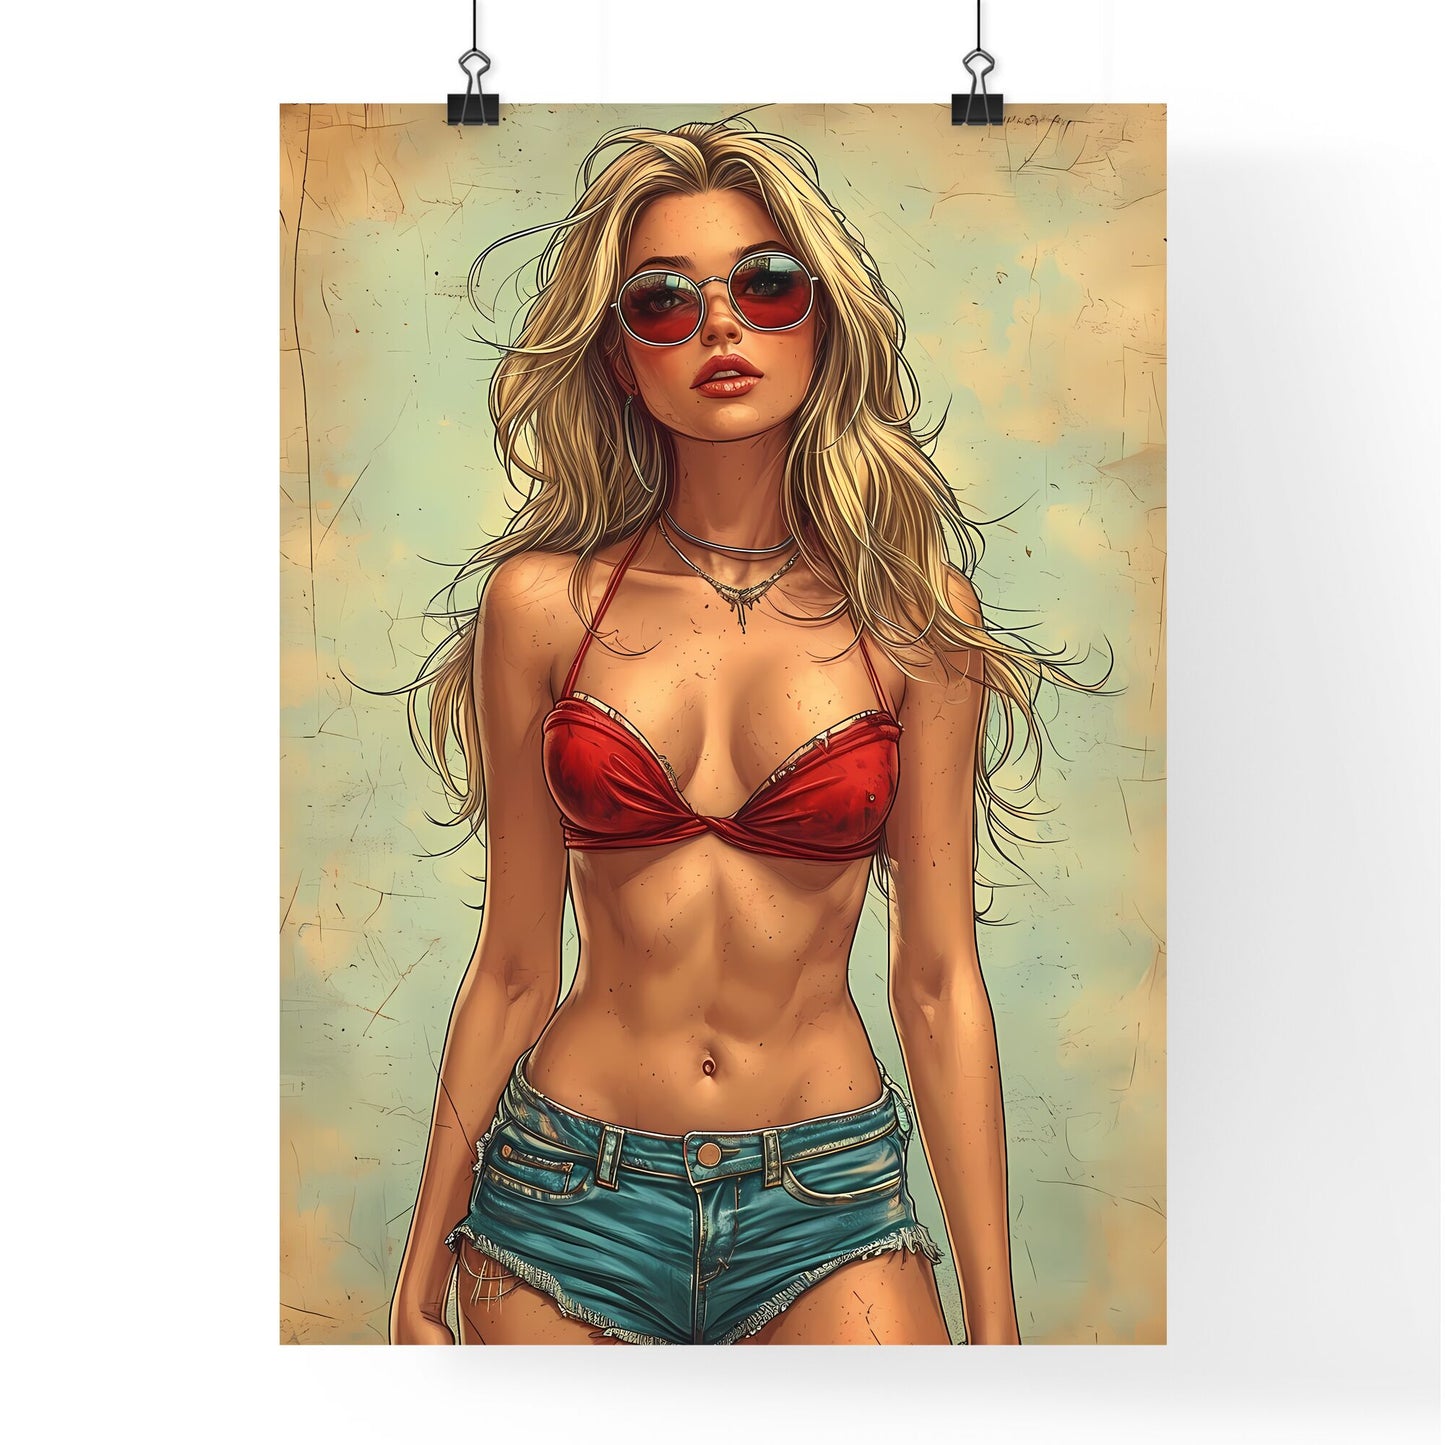 Vintage hipster woman - Art print of a woman wearing sunglasses and a garment top Default Title